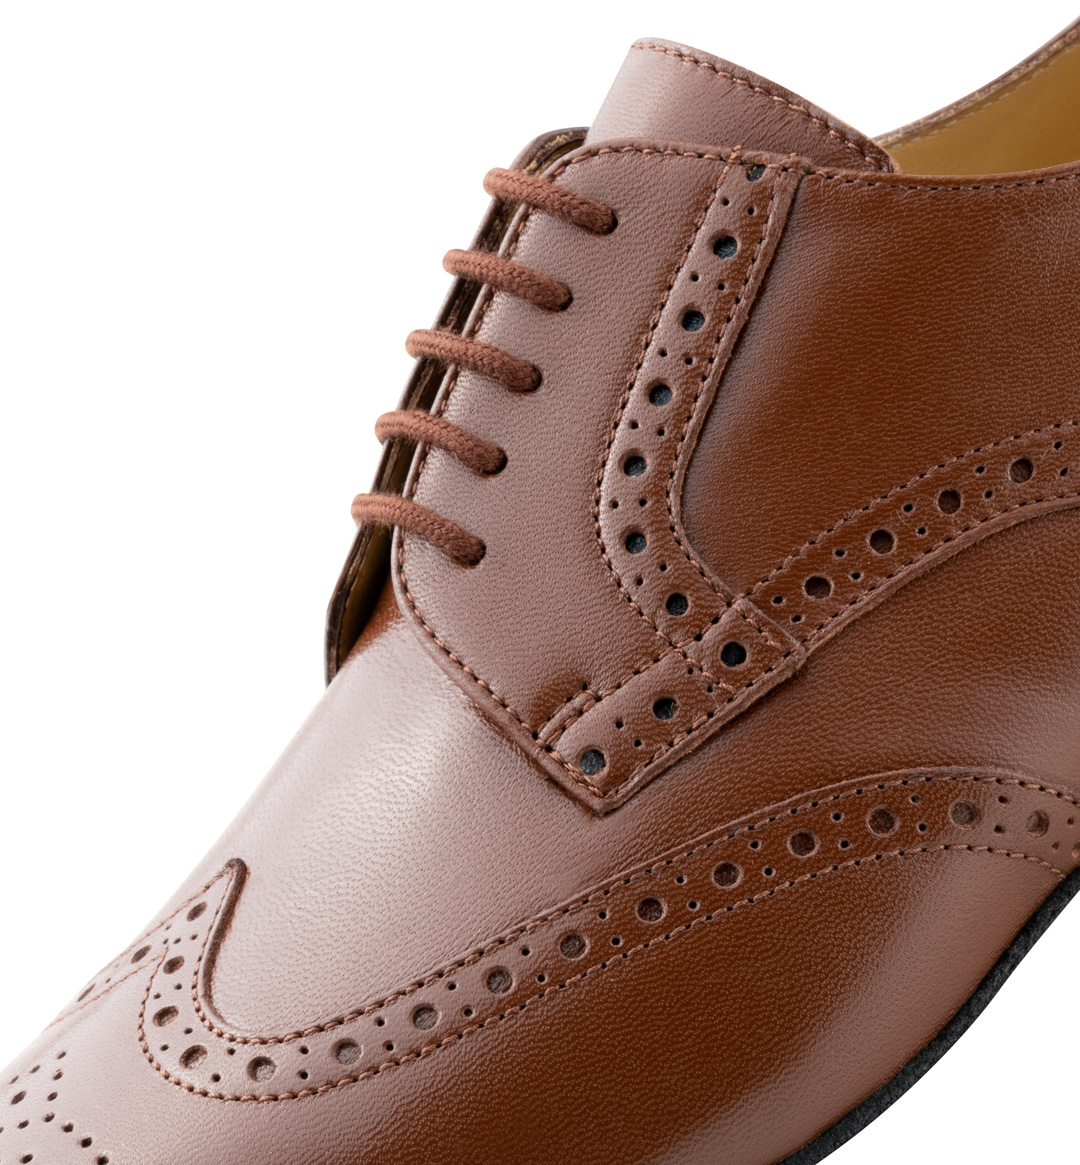 Detailed view of the front area of the Werner Kern men's dance shoe in brown